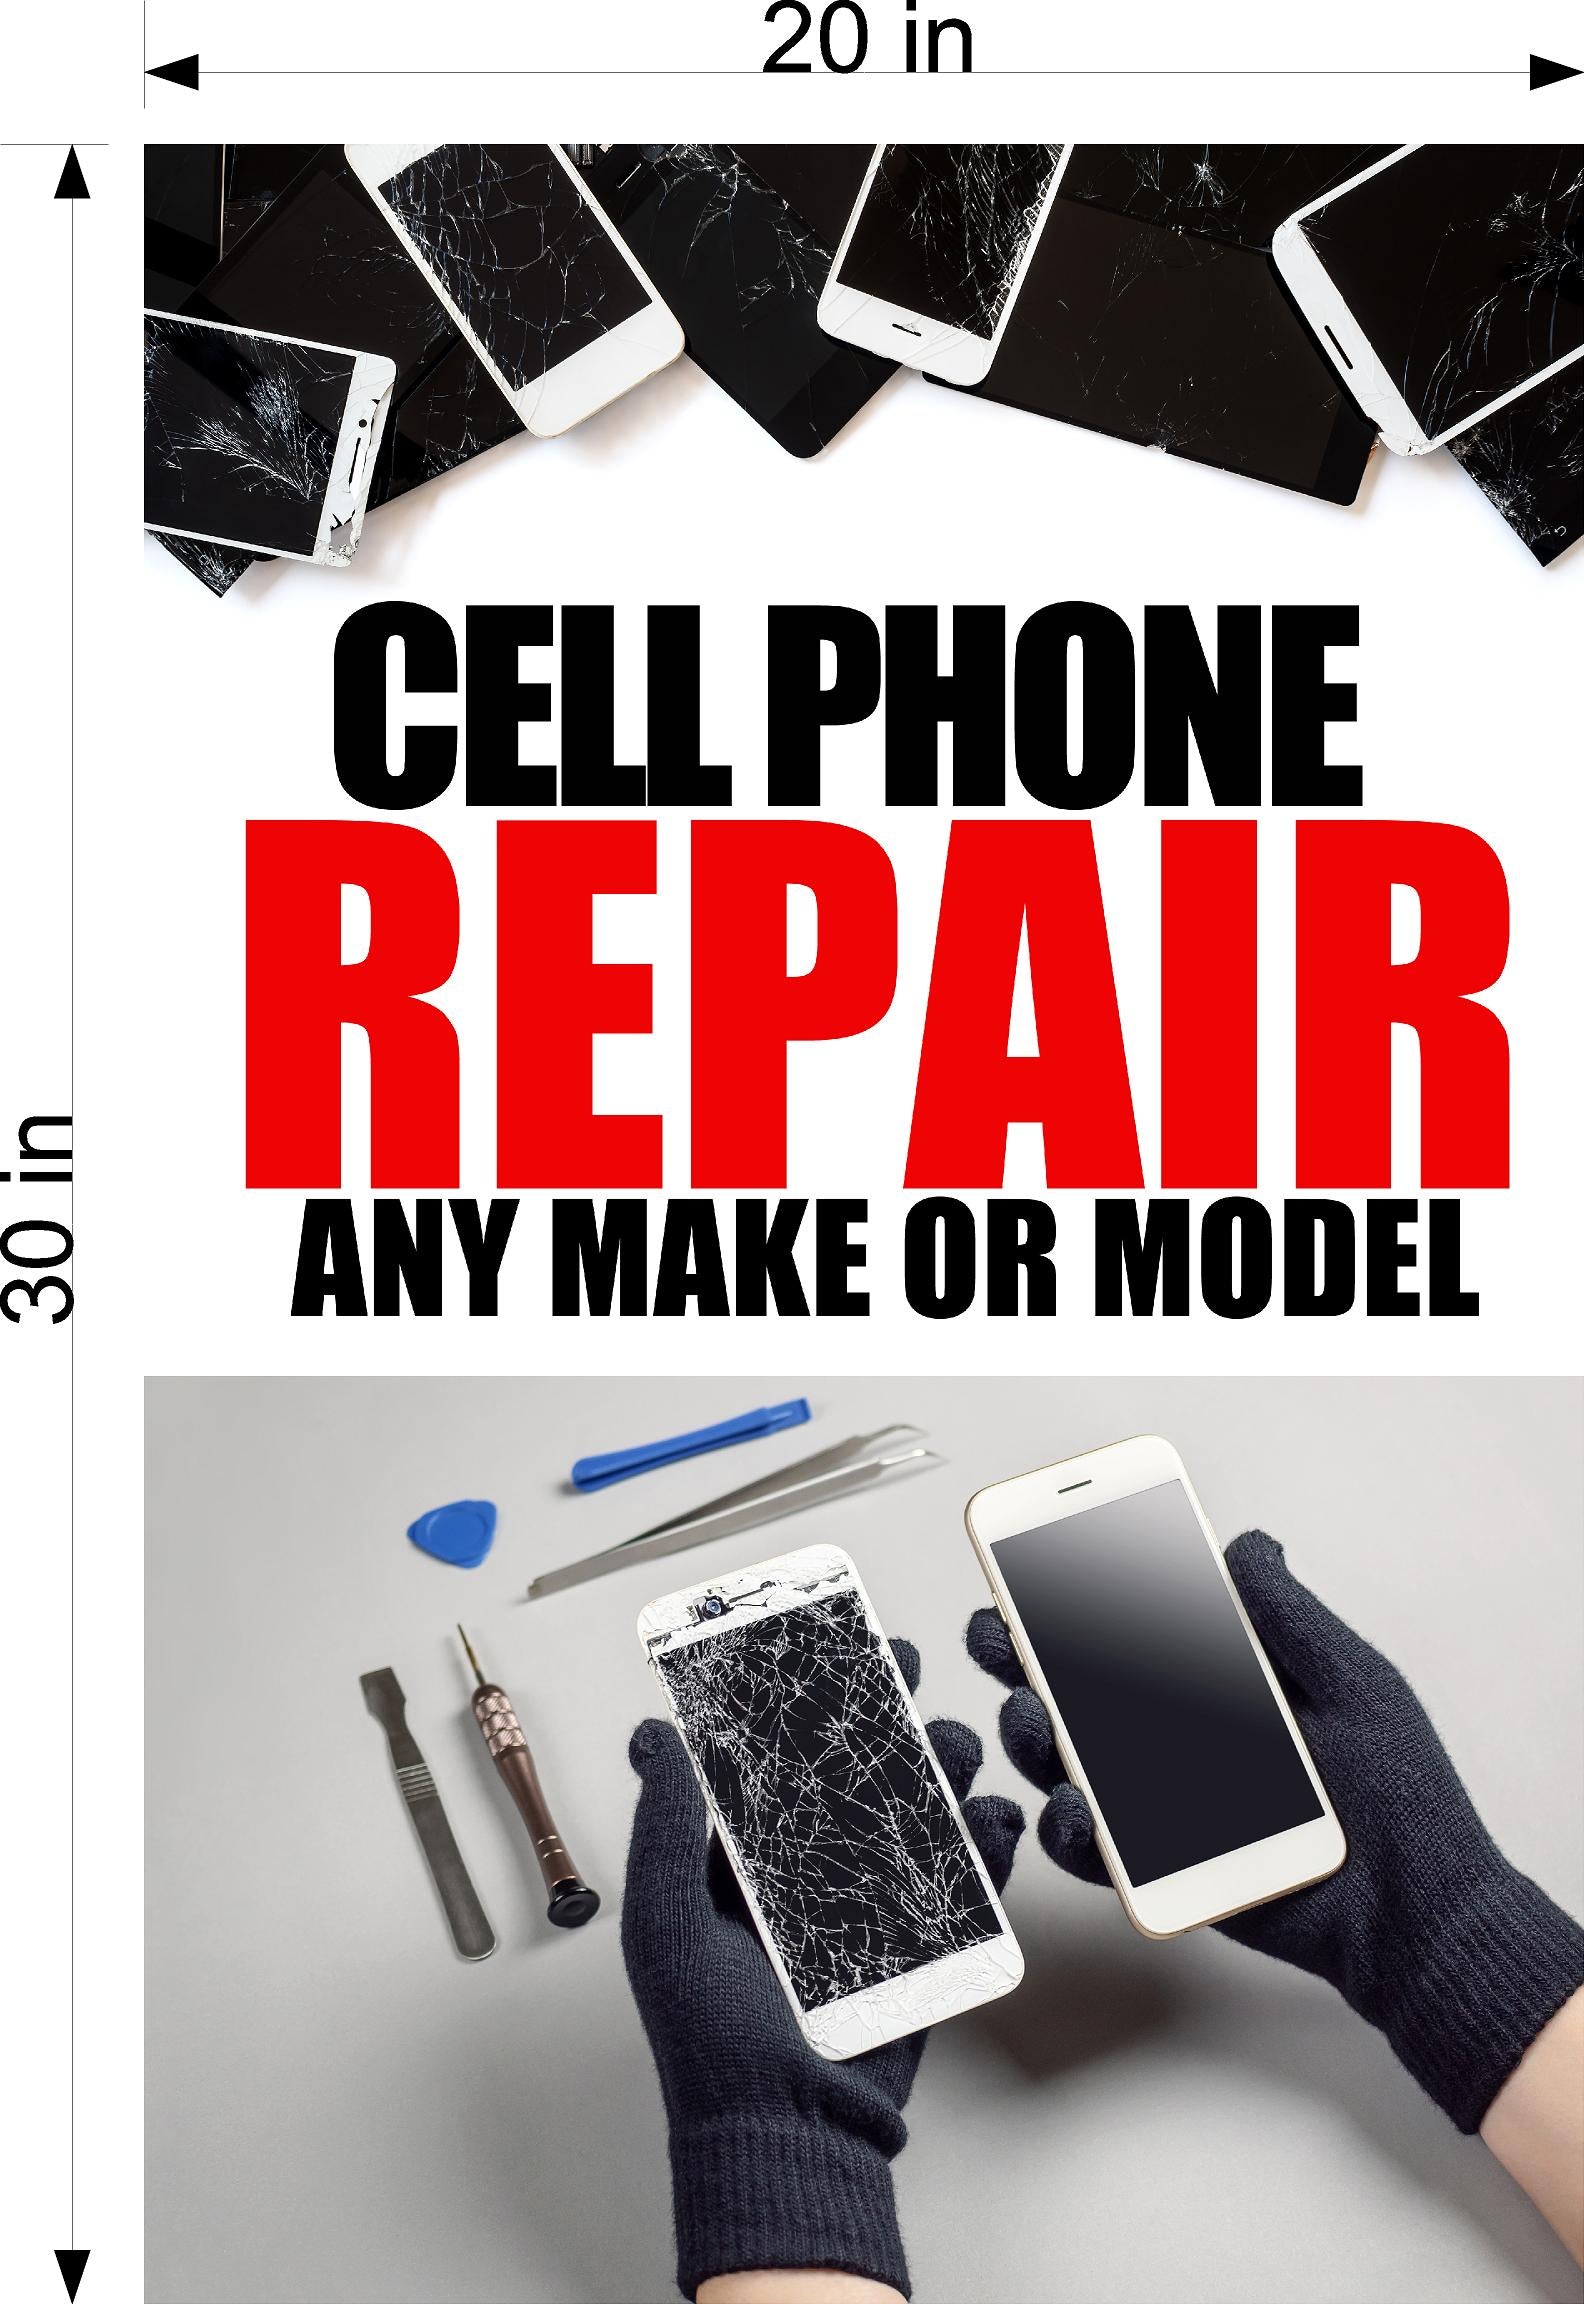 Phone Repair 03 Perforated Mesh One Way Vision See Through Window Vinyl Buy Fix Cell Tablet Sign Salon Vertical